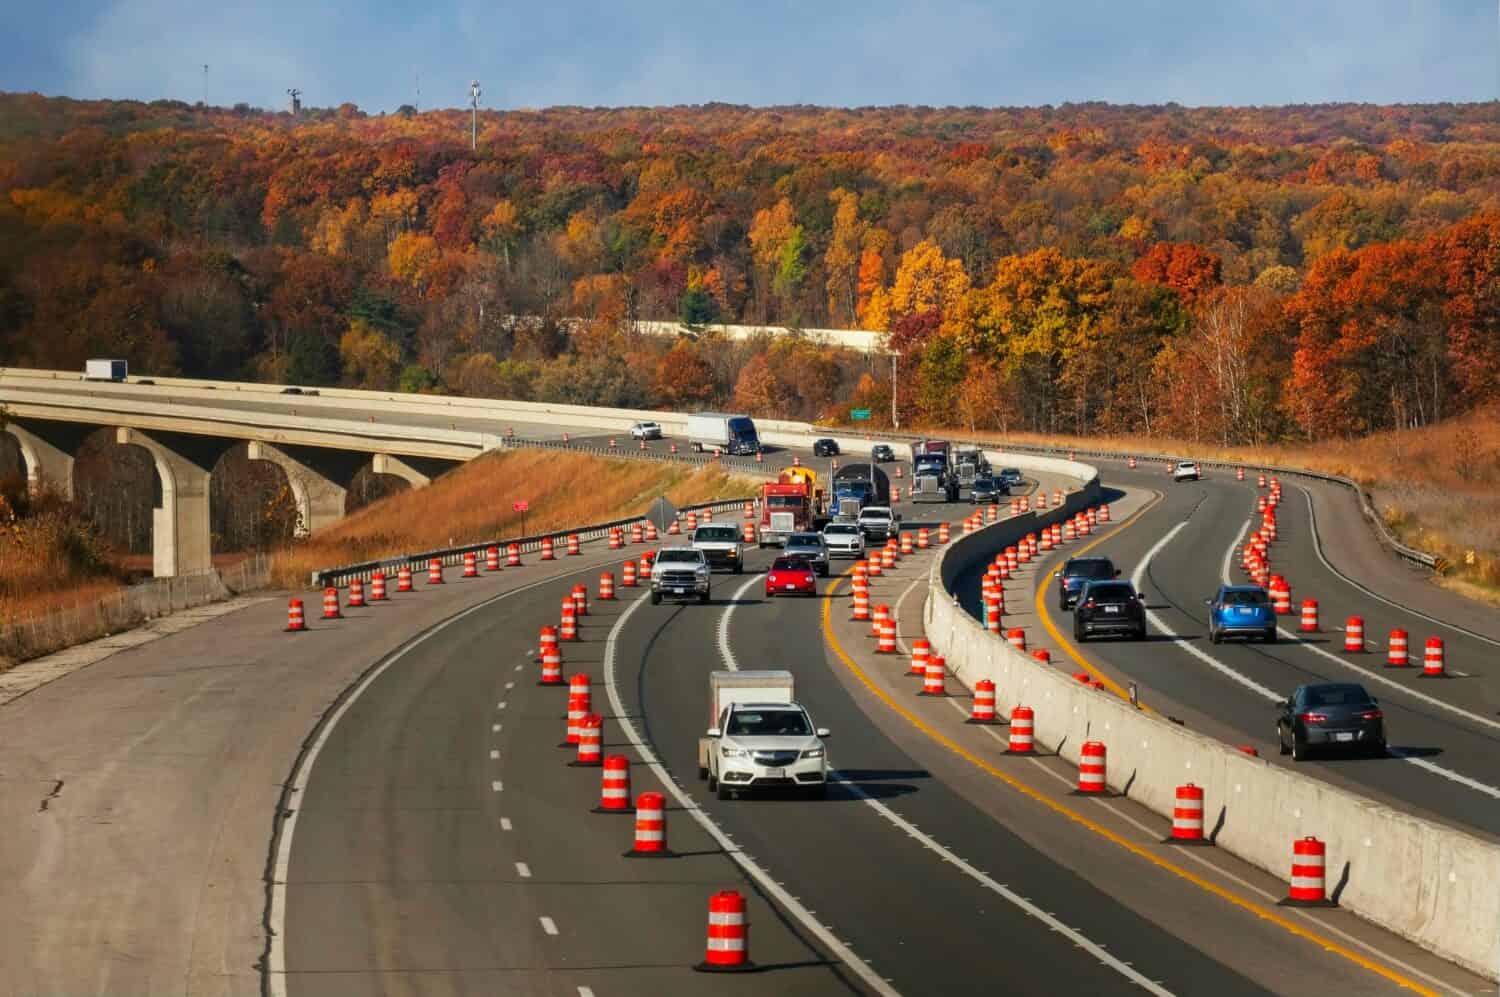 Oncoming traffic on the Ohio Turnpike rounds a curve after crossing the Cuyahoga Valley in autumn.